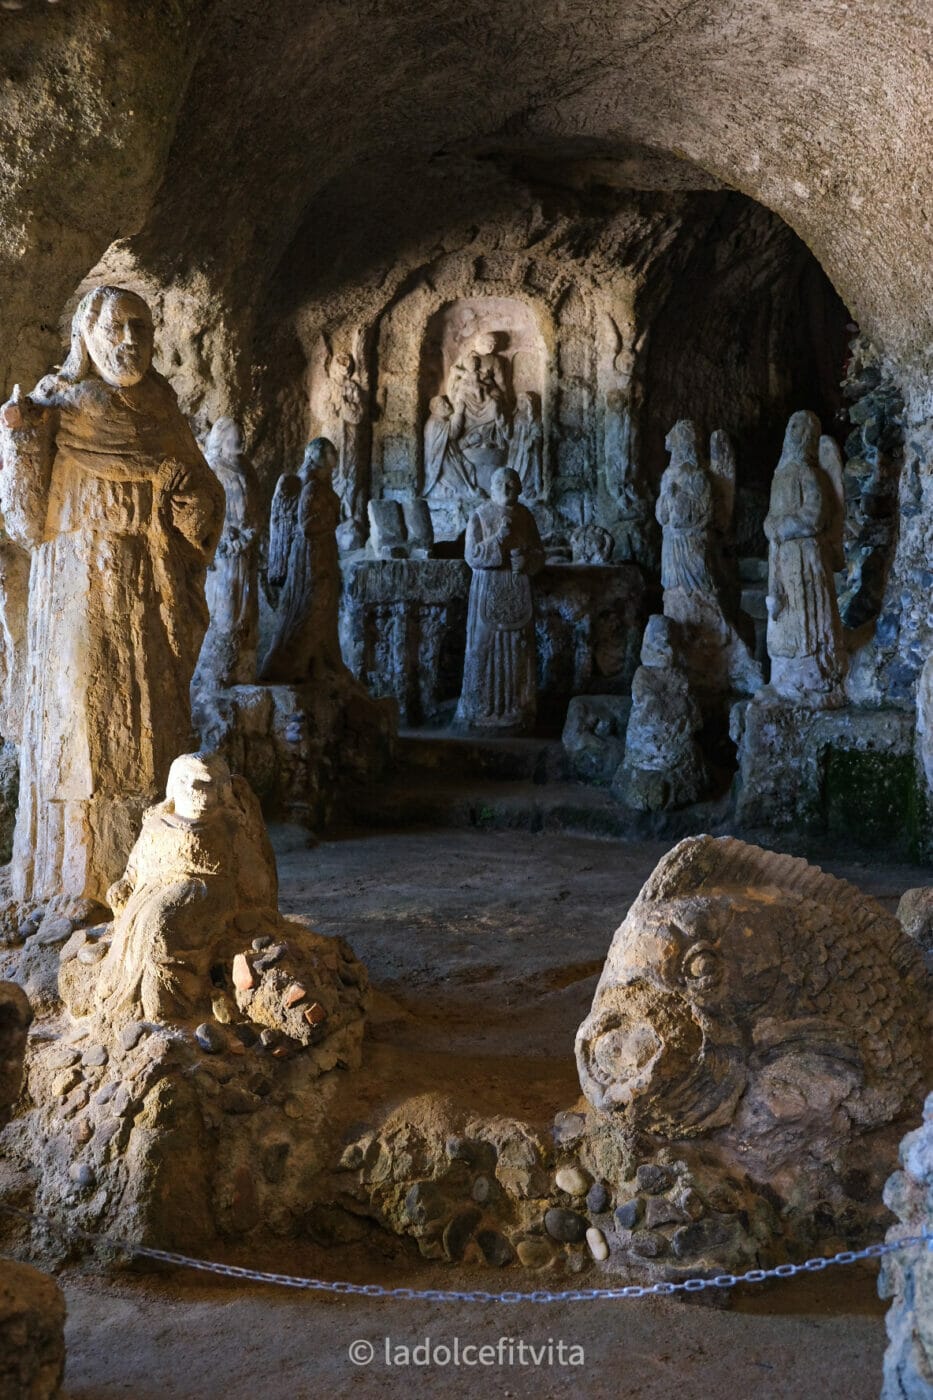 sacred statues carved from stone in the Piedigrotta chuch in Pizzo Calabria, Italy